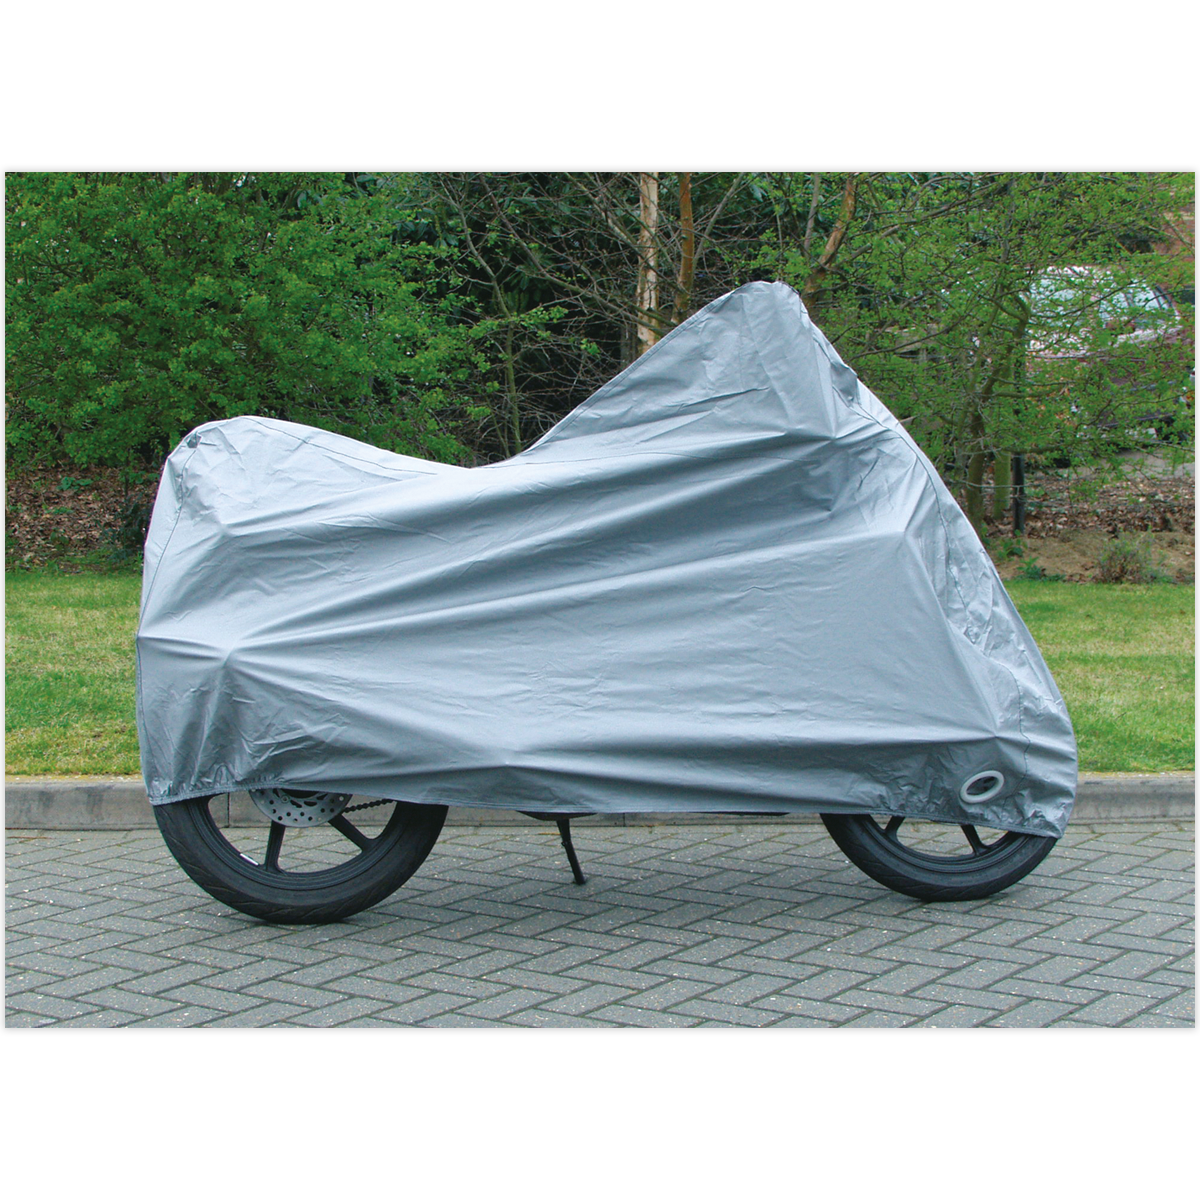 SEALEY - MCS Motorcycle Cover Small 1830 x 890 x 1300mm